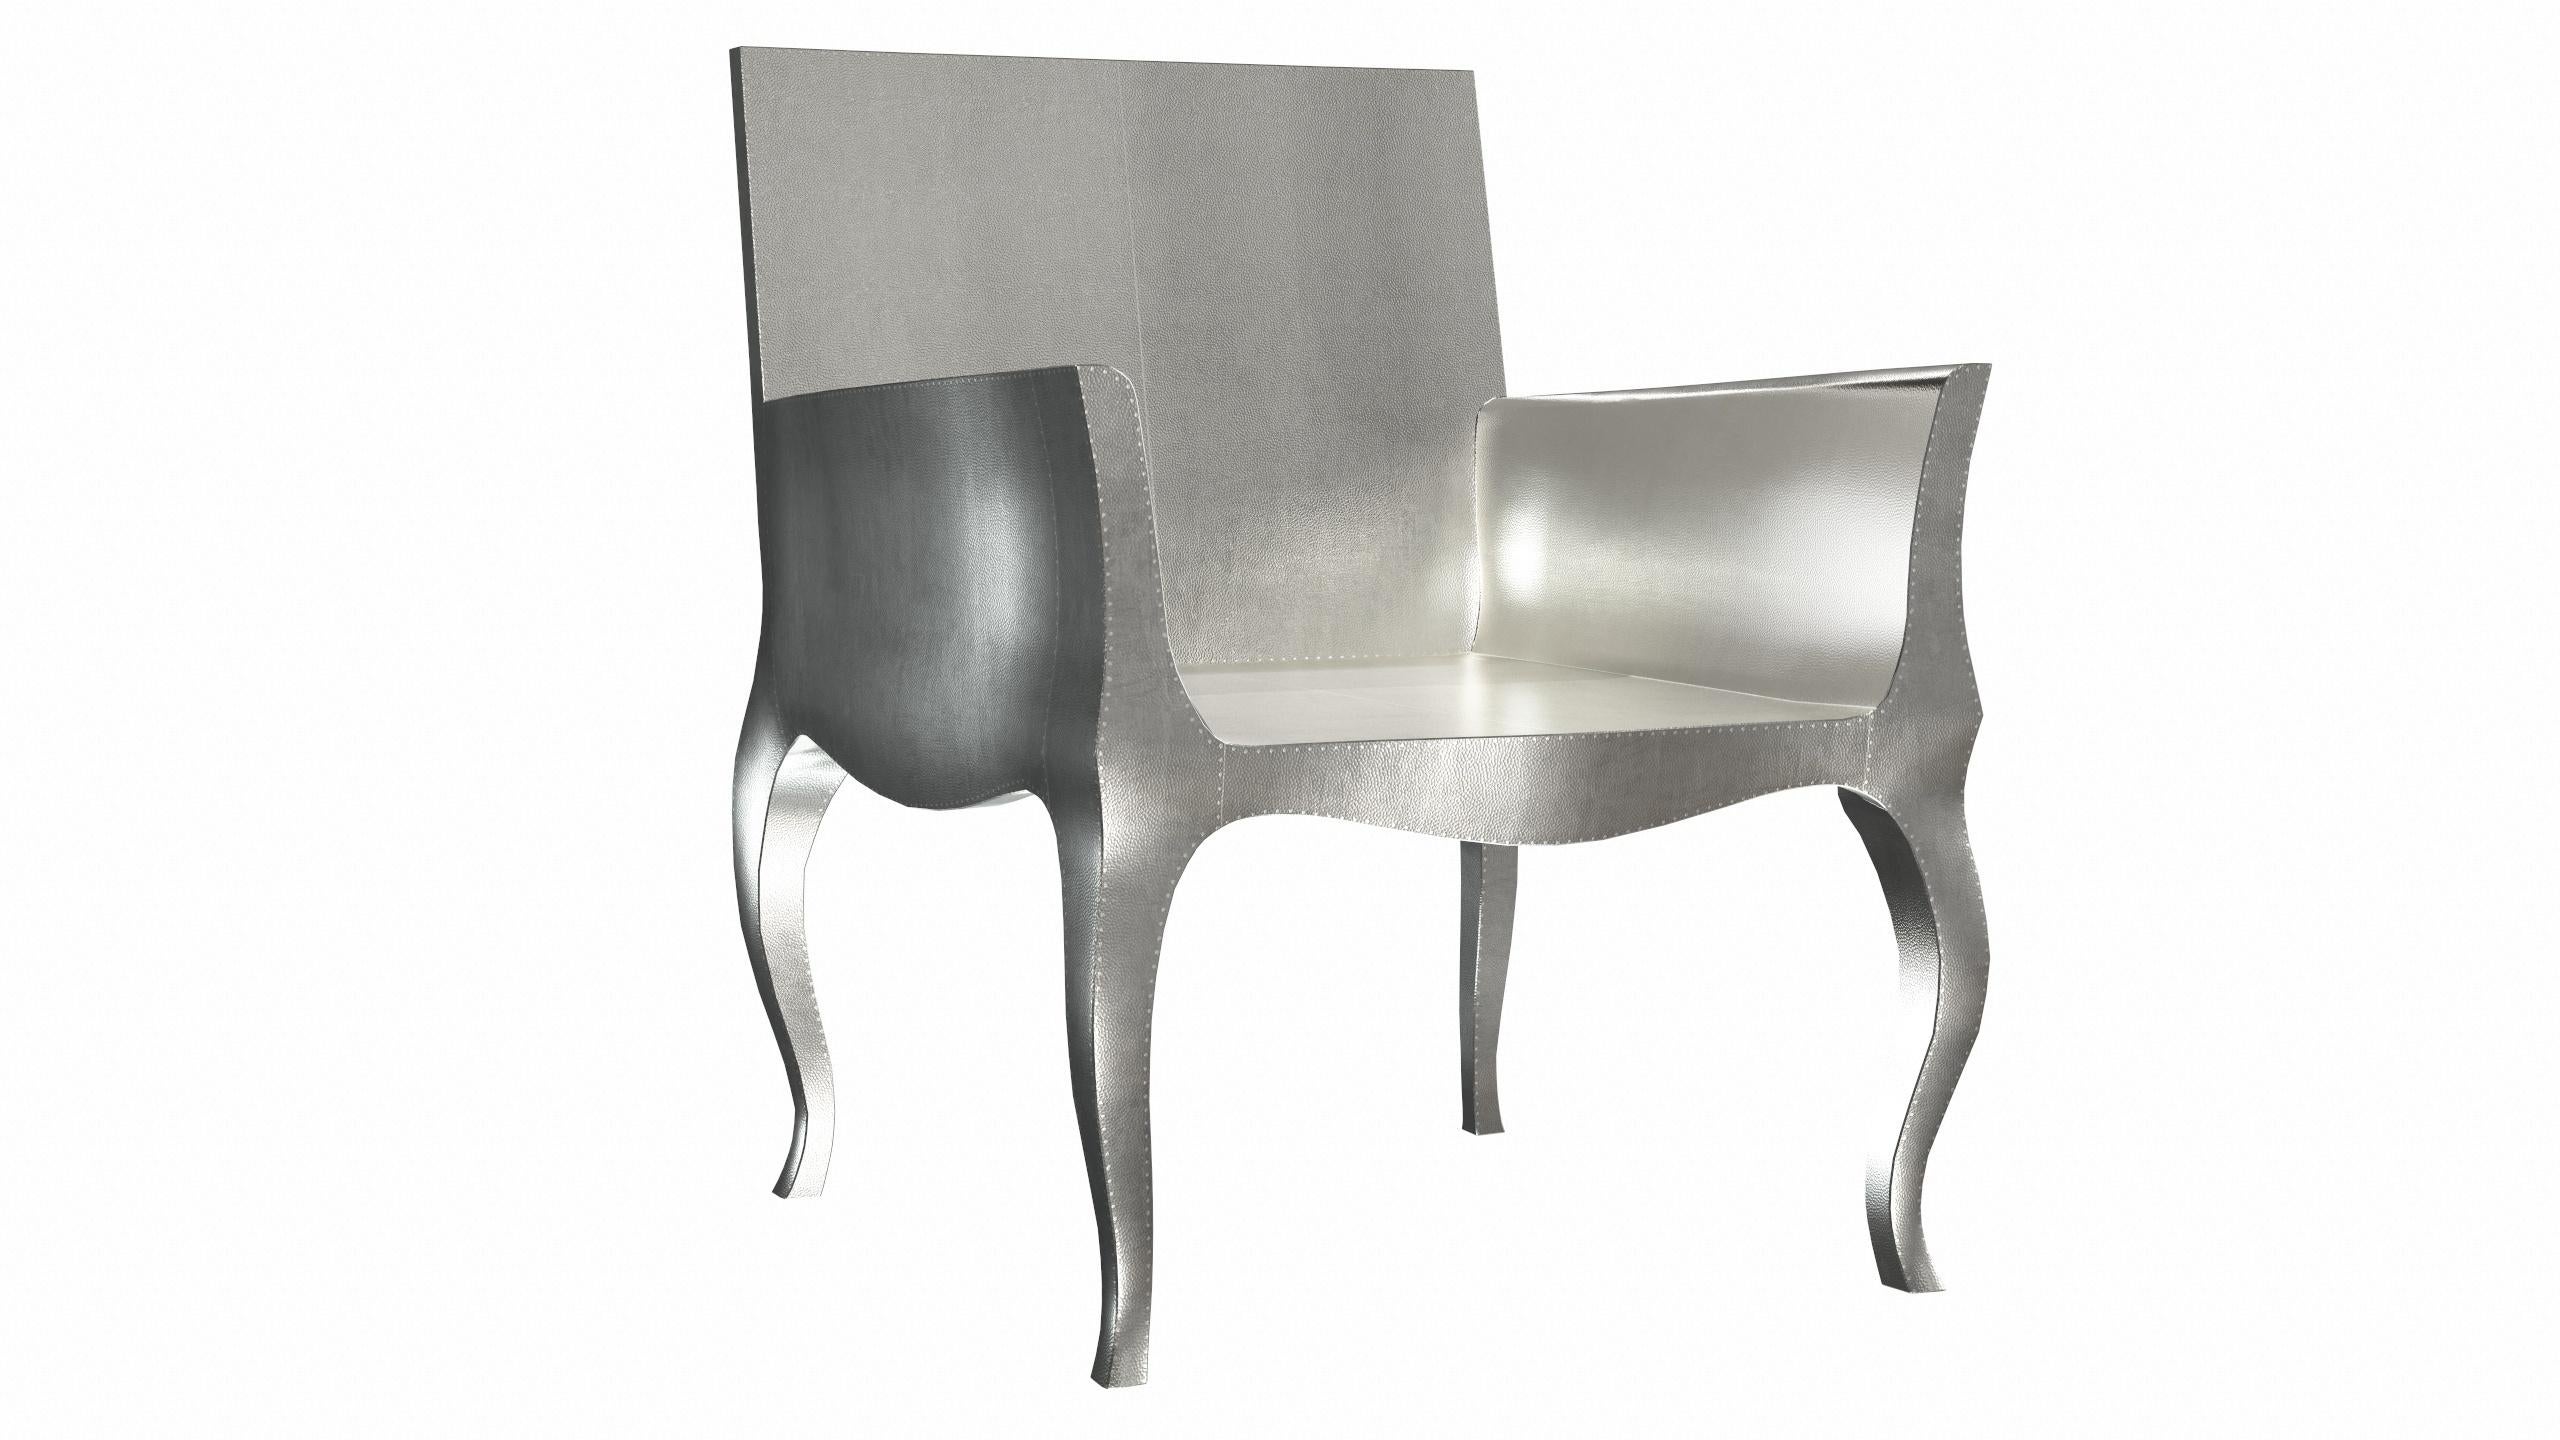 Sheet Metal Antique Art Deco Chairs Mid Hammered in White Bronze by Paul Mathieu For Sale